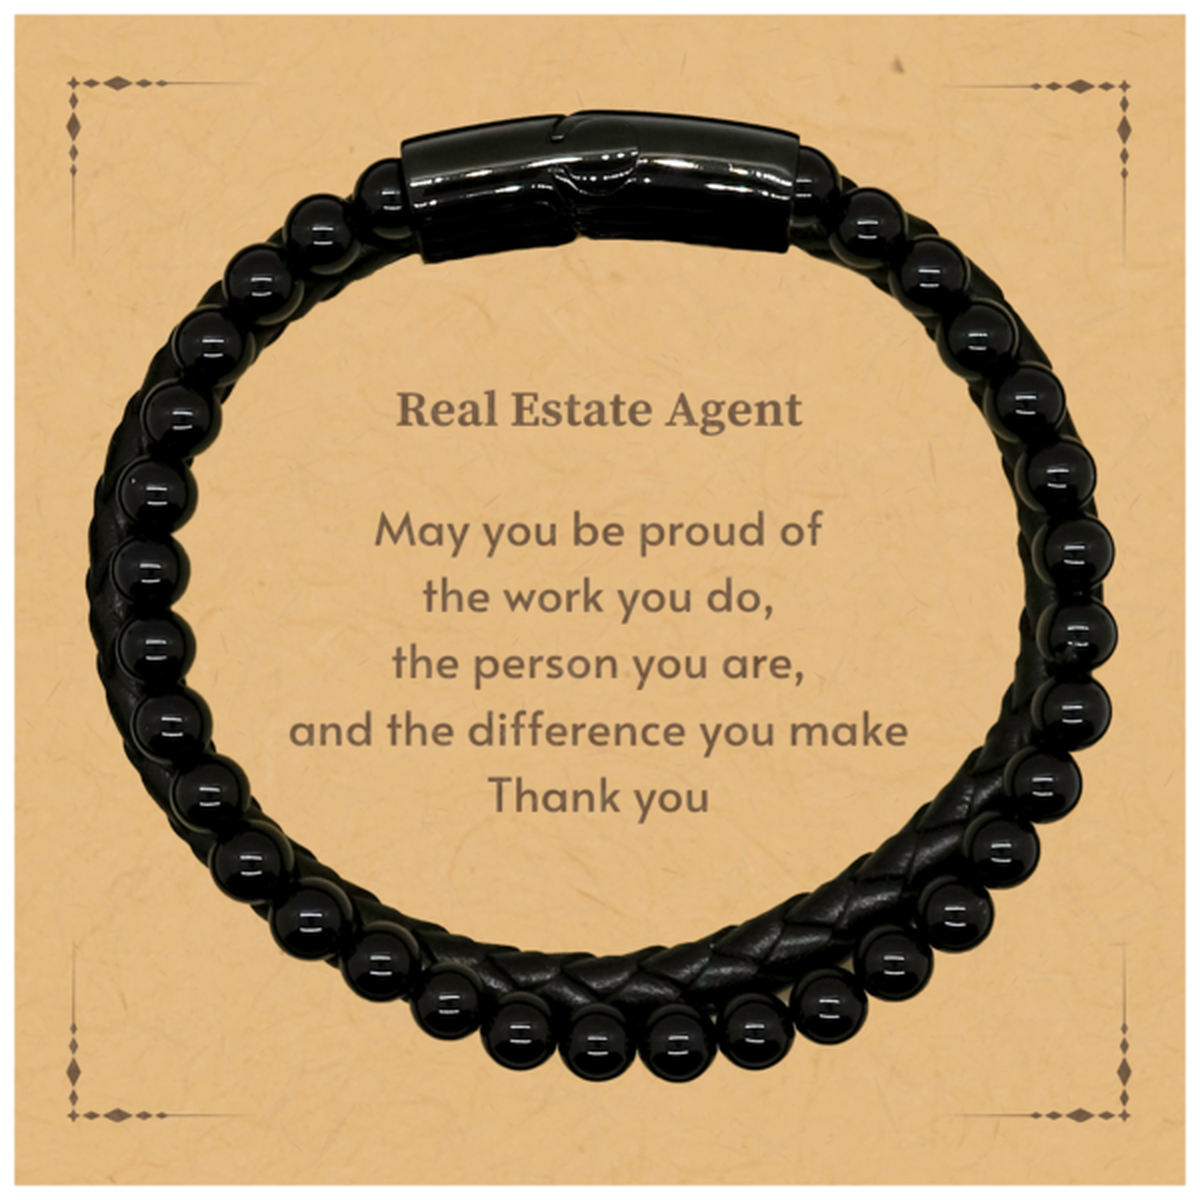 Heartwarming Stone Leather Bracelets Retirement Coworkers Gifts for Real Estate Agent, Real Estate Agent May You be proud of the work you do, the person you are Gifts for Boss Men Women Friends